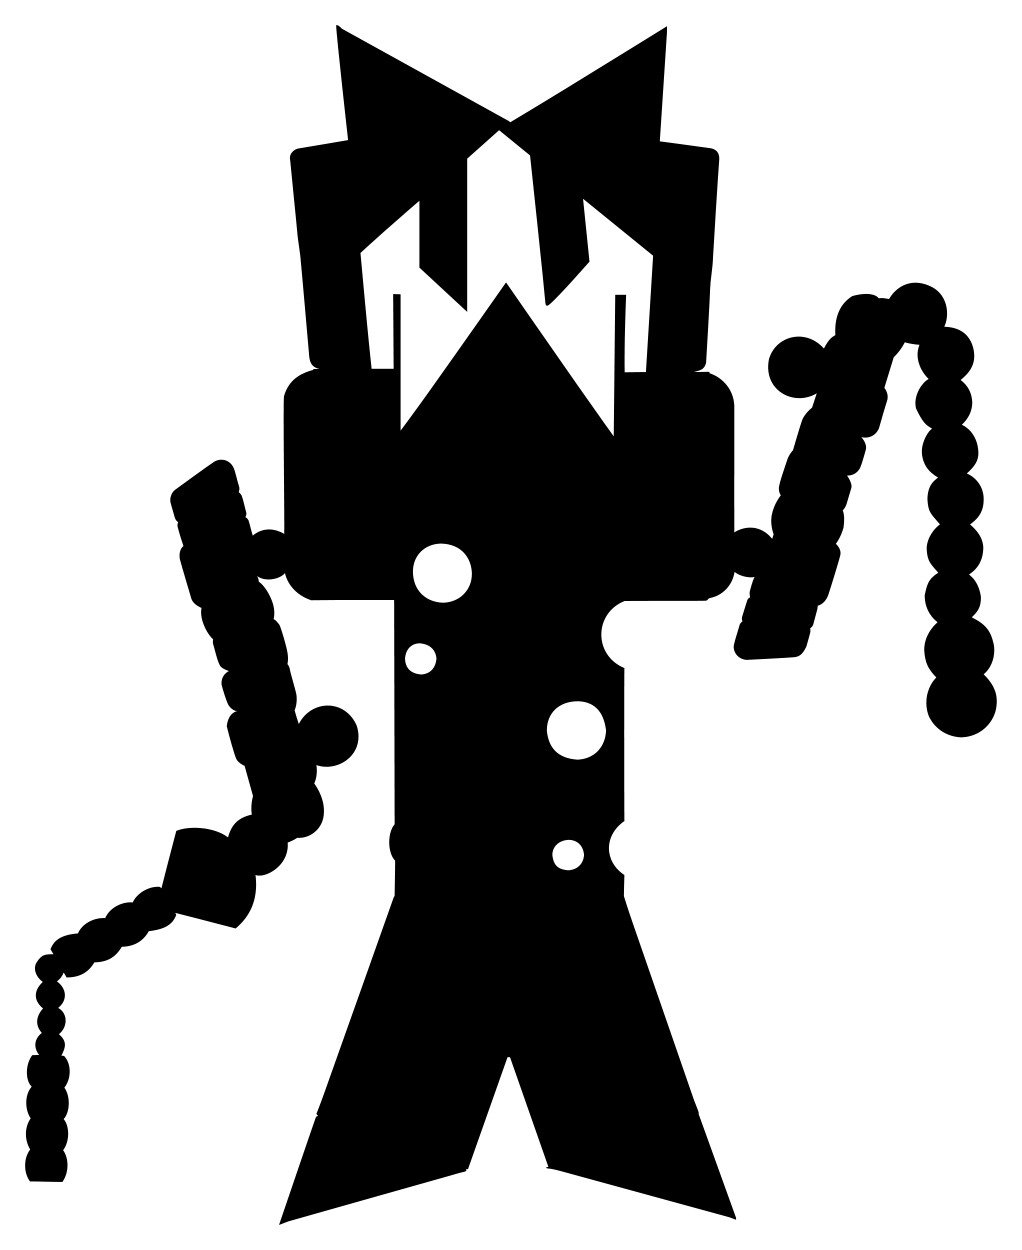 Whoppers BoxBot silhouette